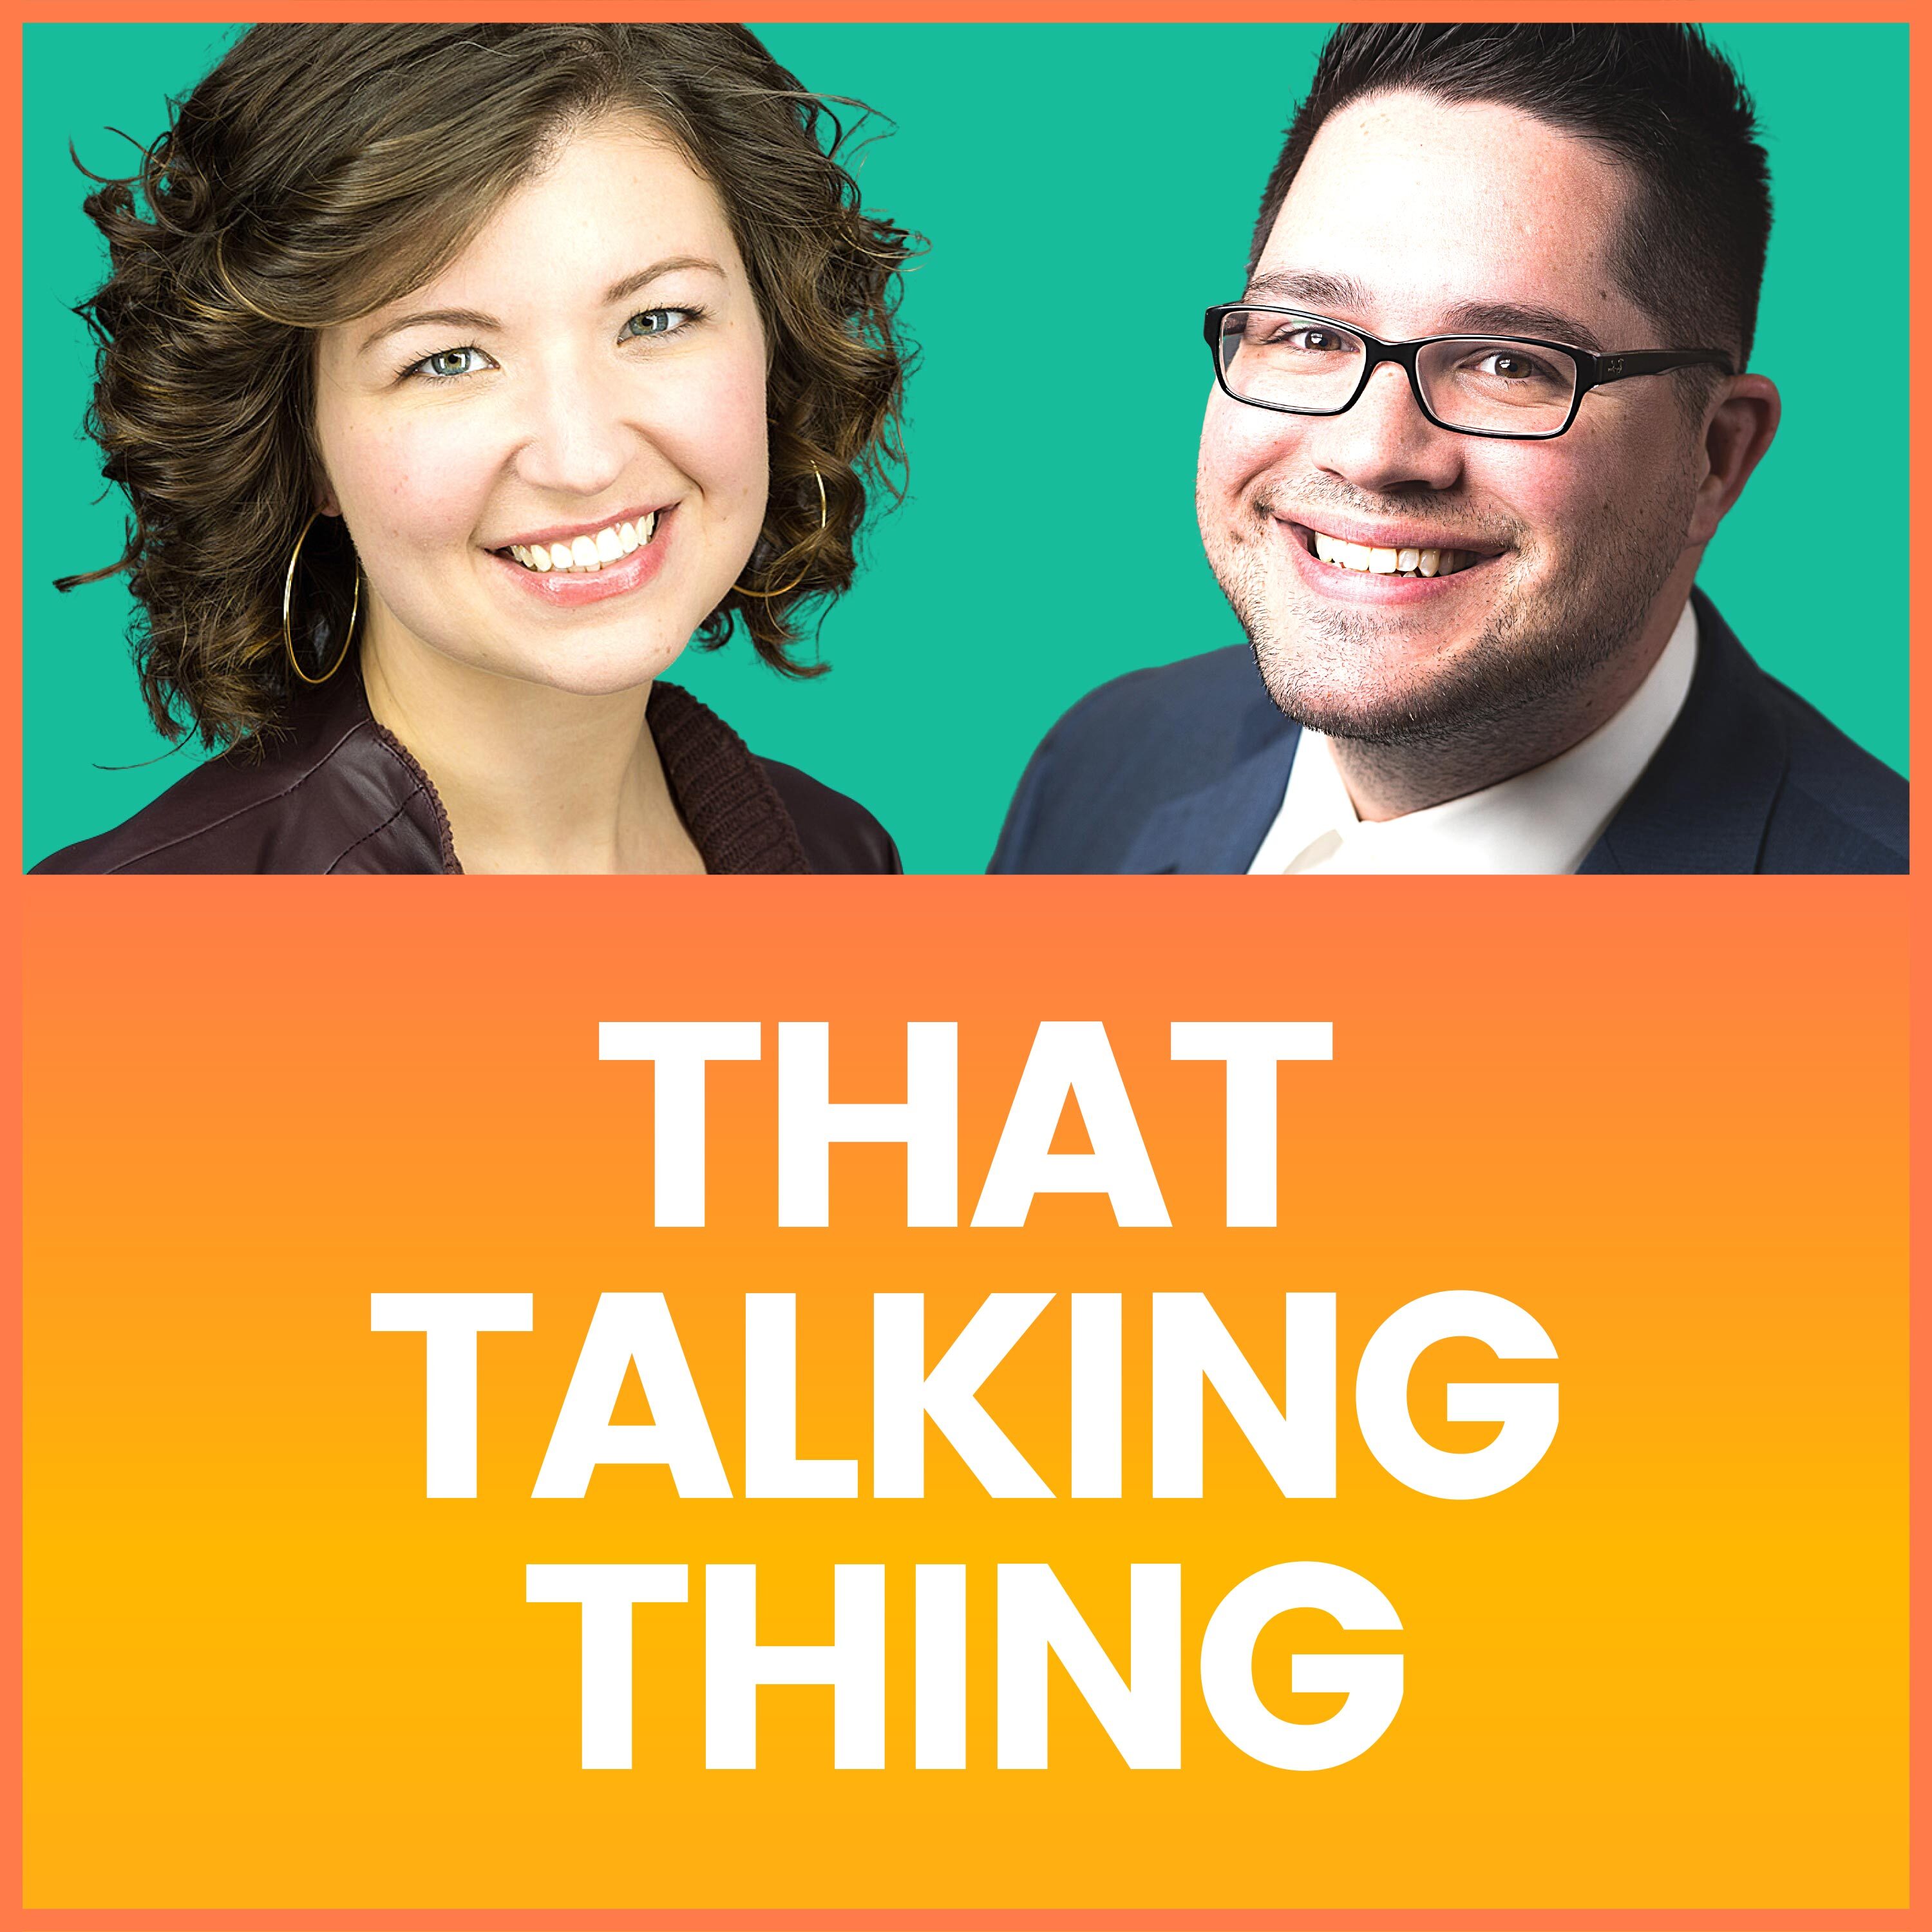 Format Change, Hiring in Advance, Learning Initiative [Business] That Talking Thing | S2 EP1